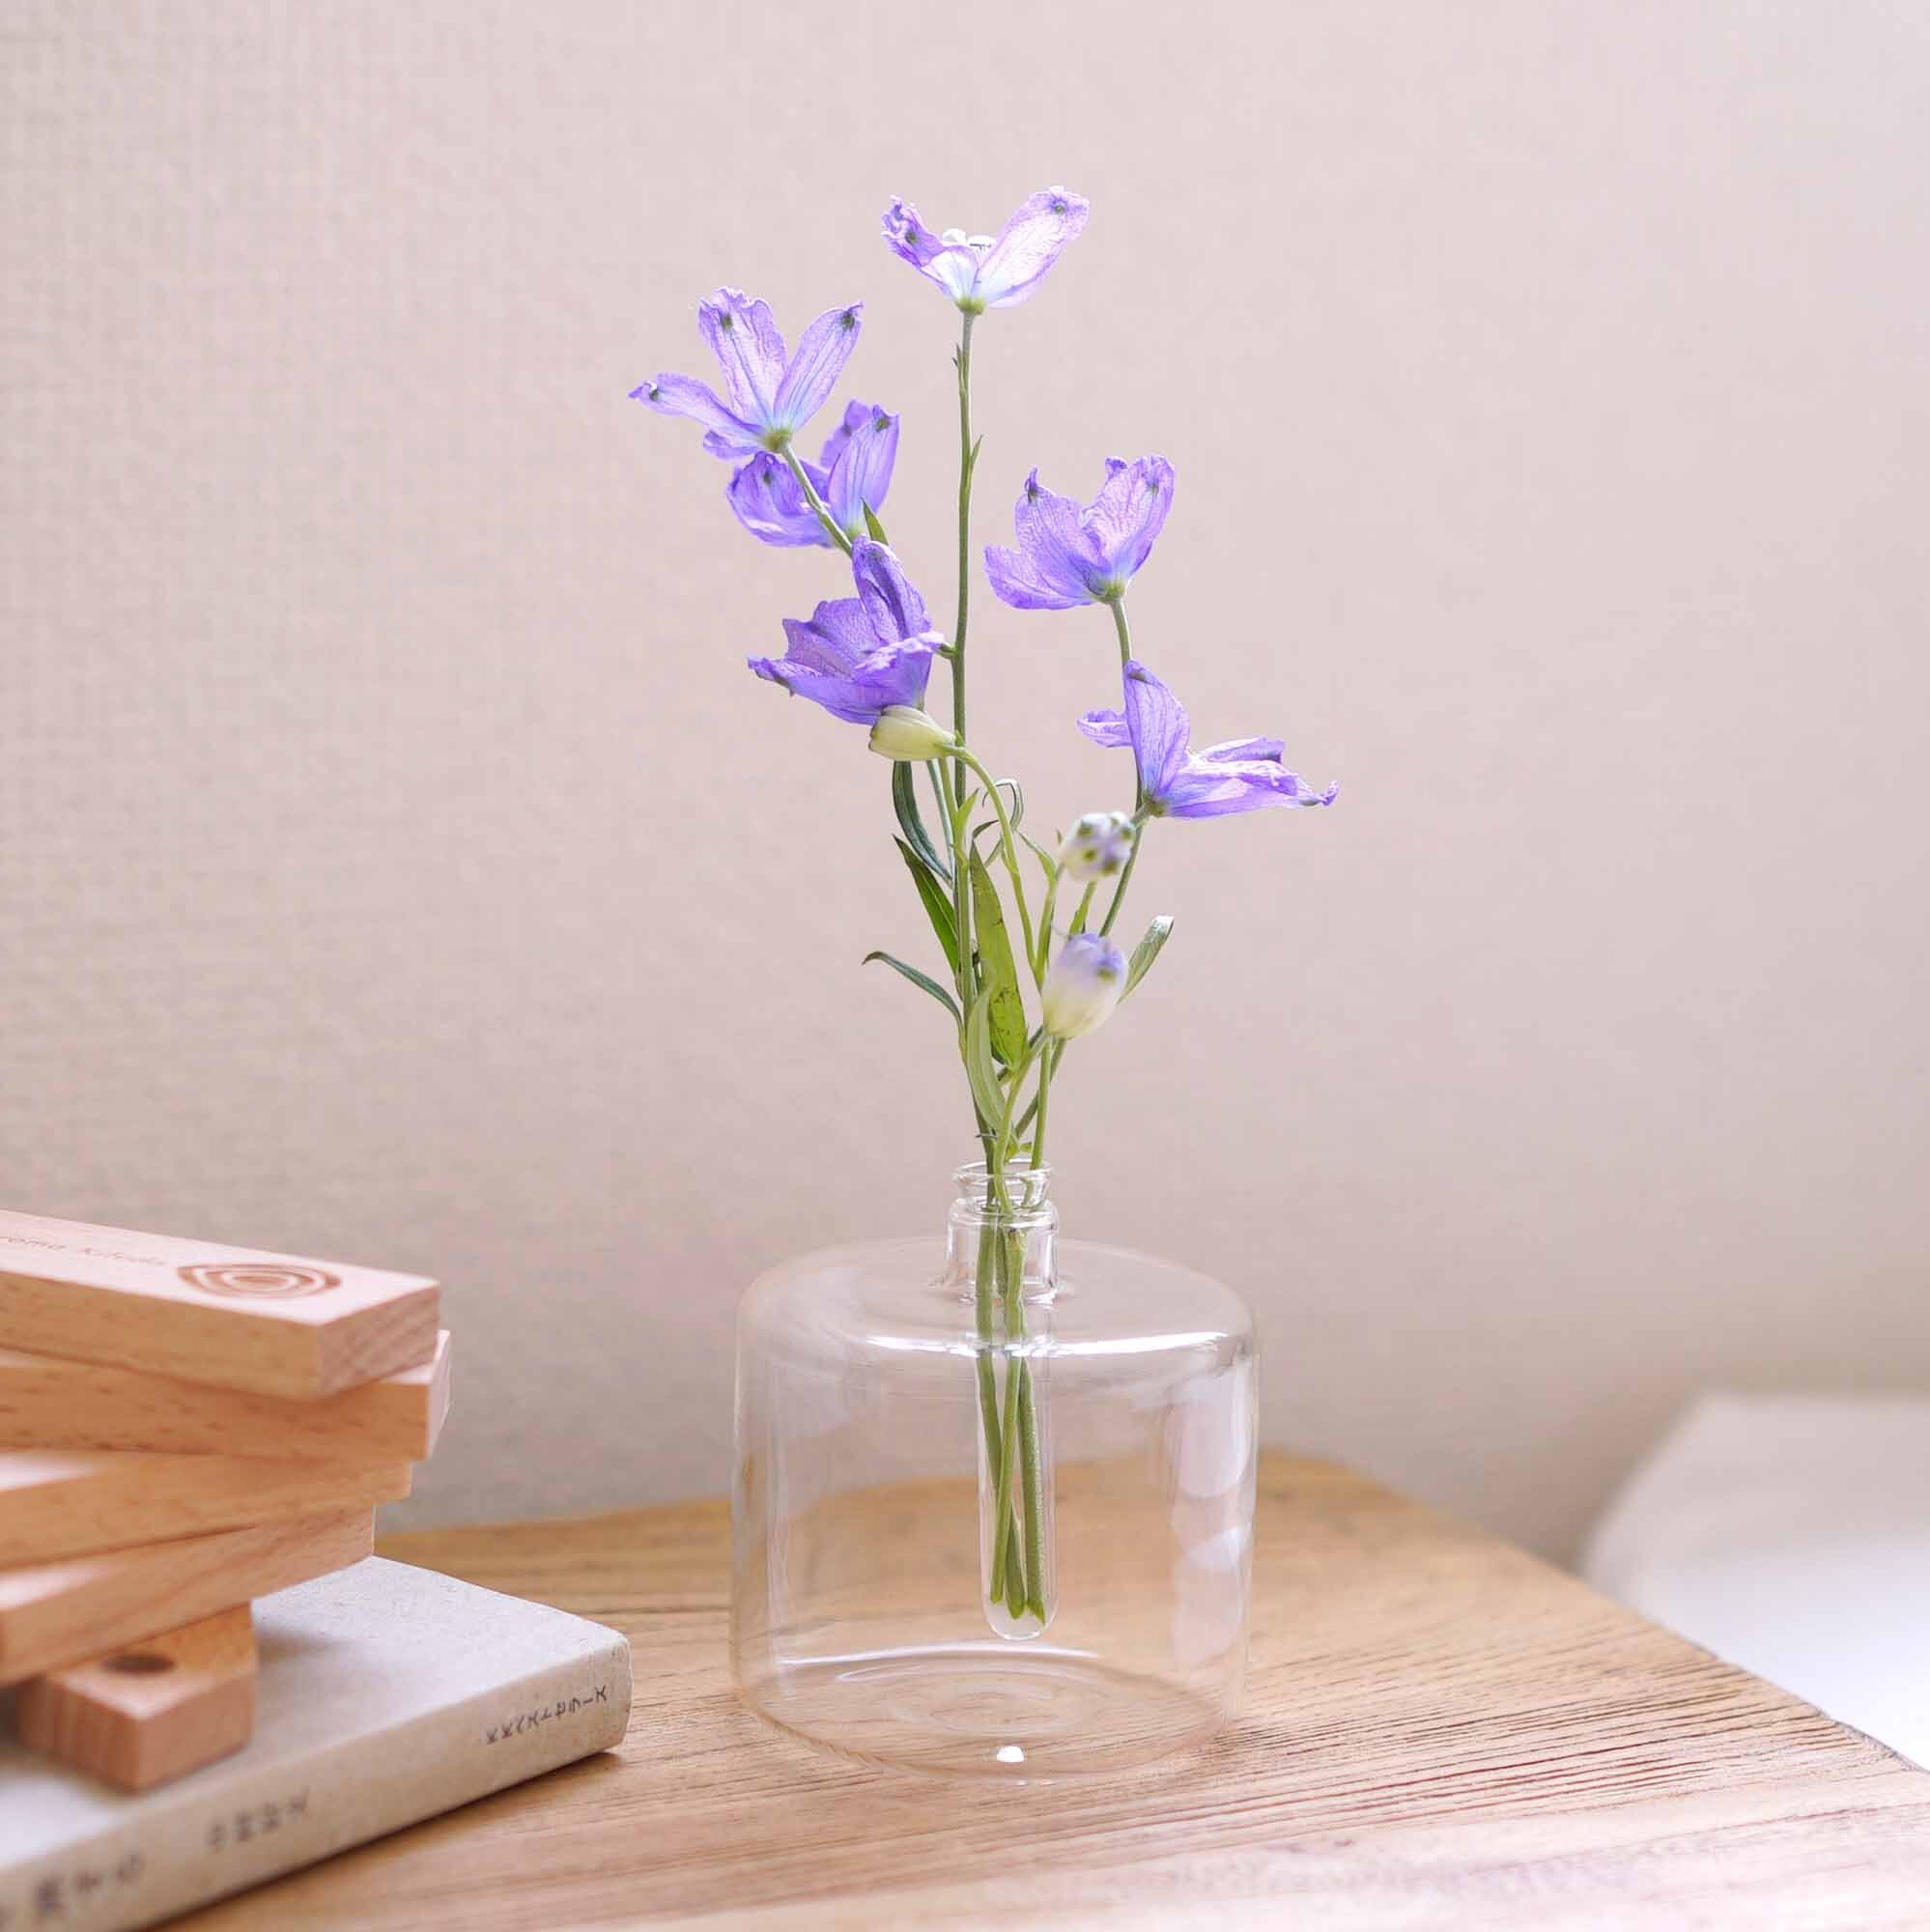 Round glass diffuser with purple flowers on a natural wood coffee table beside a white book and stacking blocks.